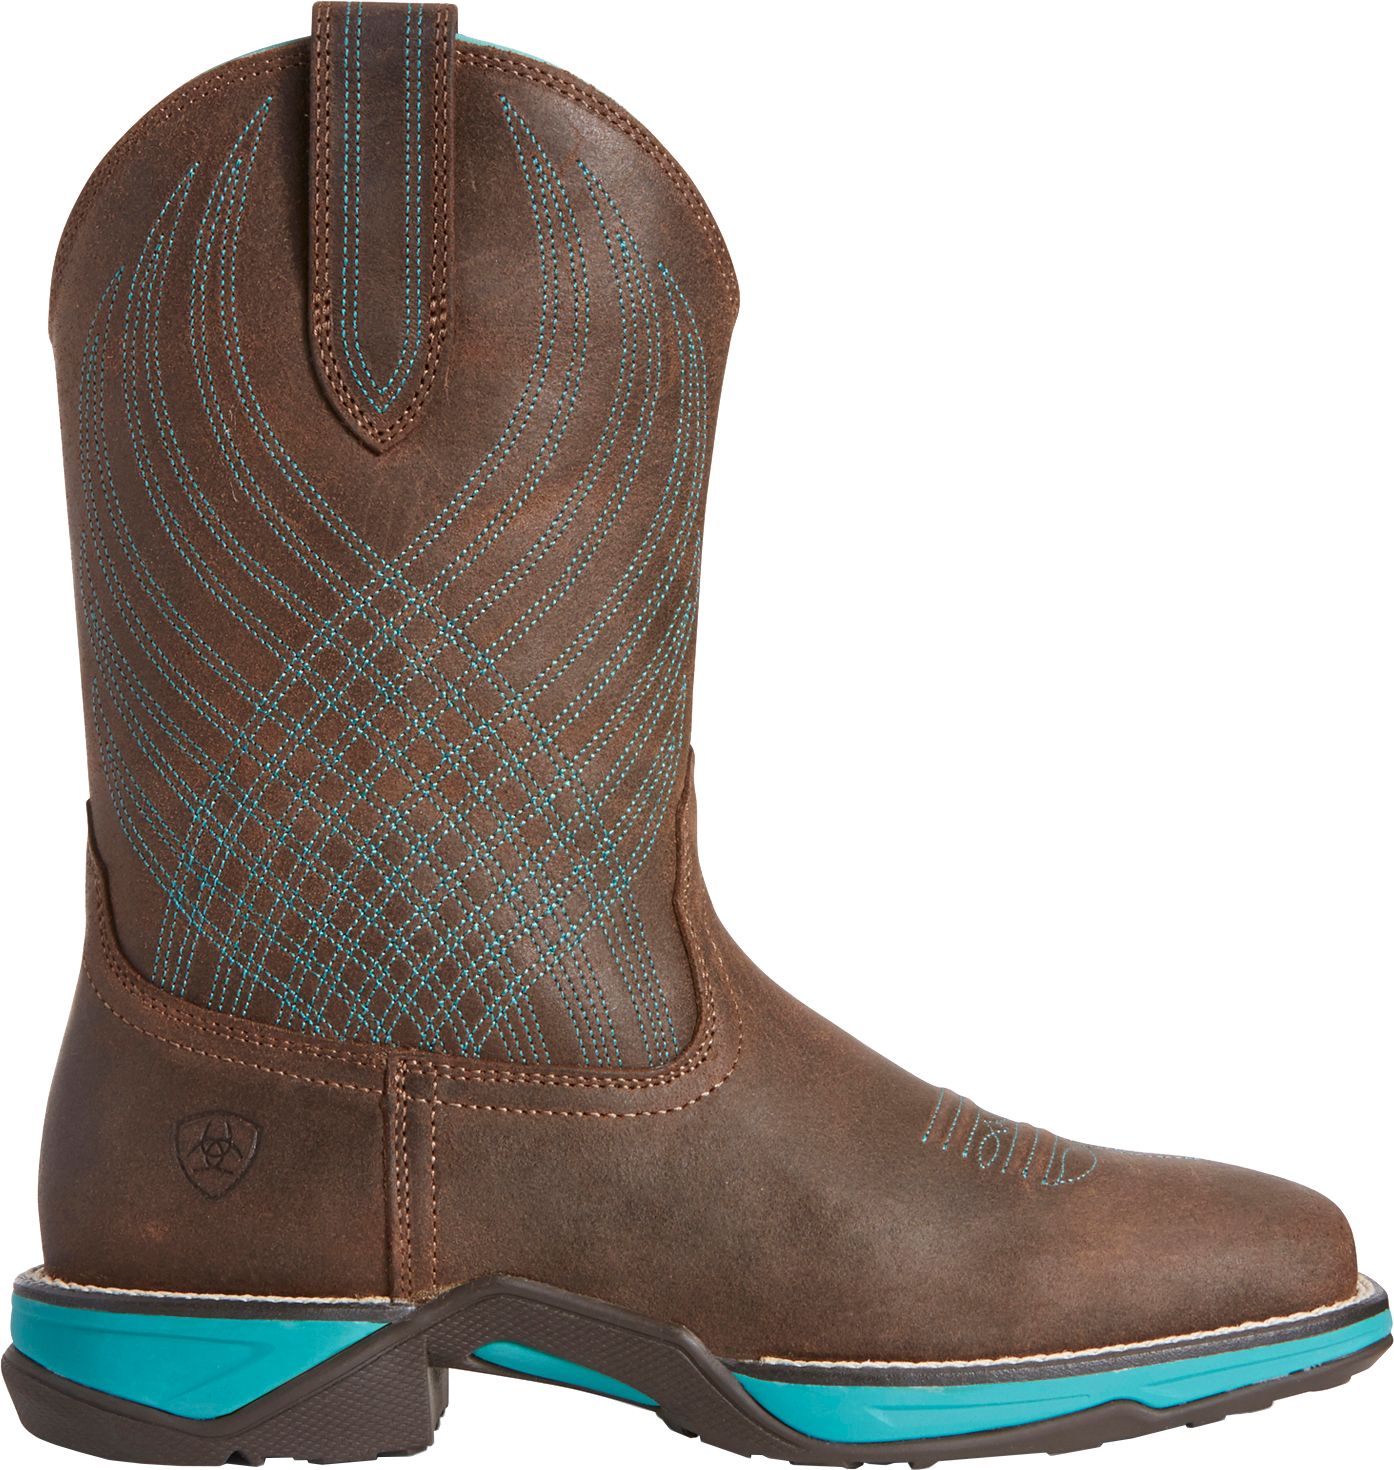 ariat cowgirl boots